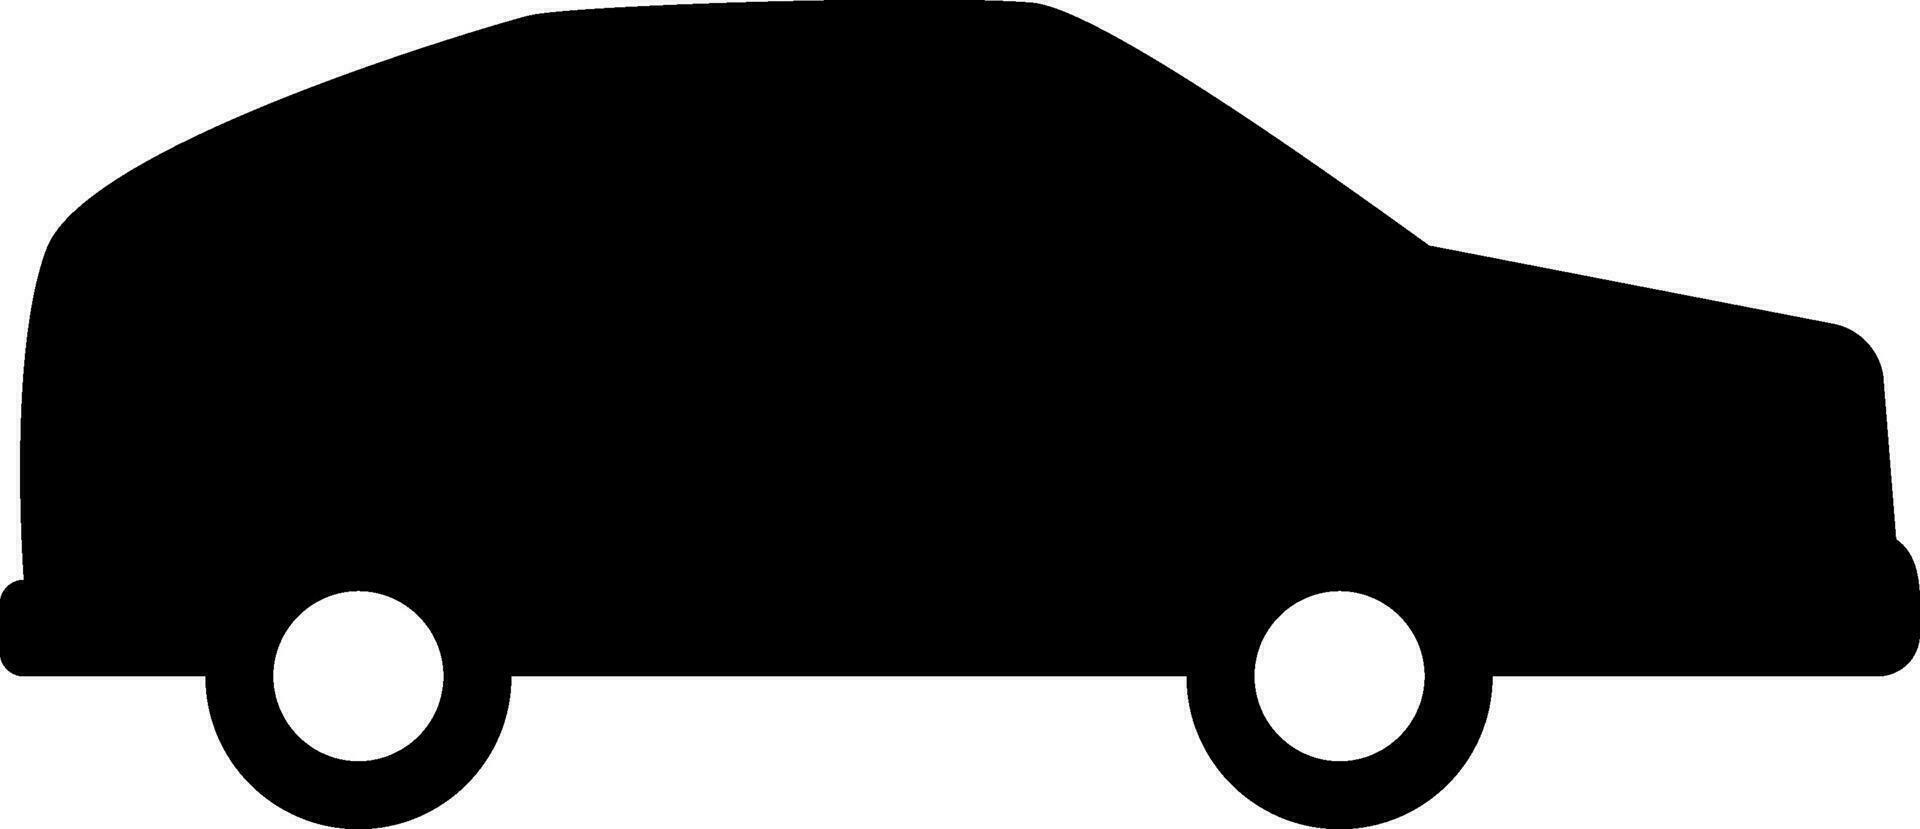 Isolated flat icon of car. black and white color. vector